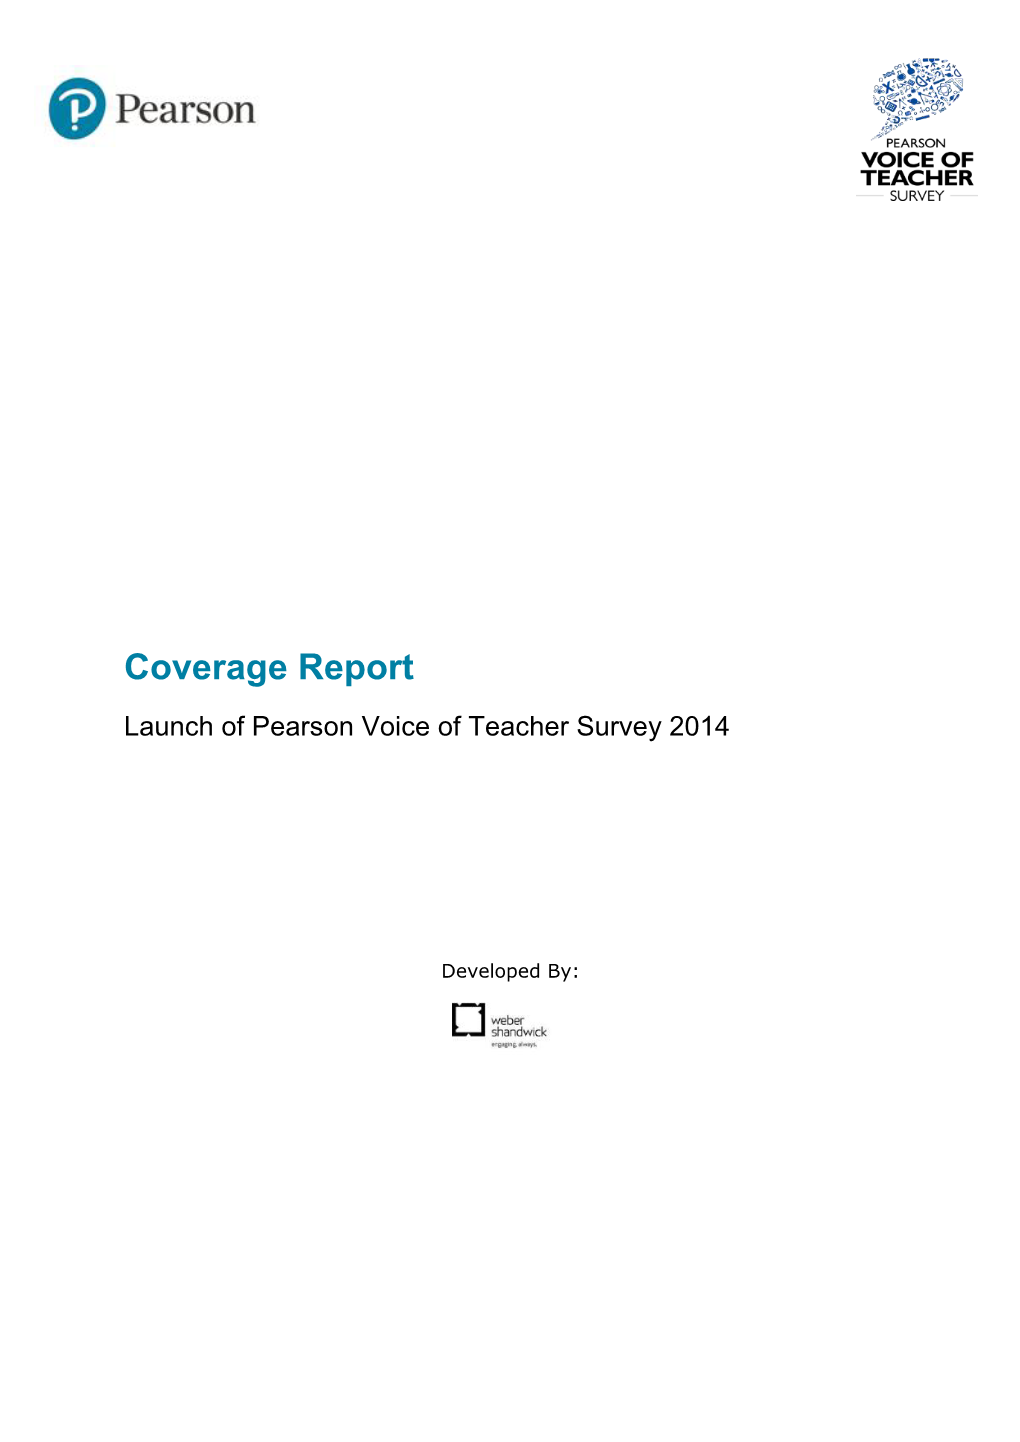 Coverage Report Launch of Pearson Voice of Teacher Survey 2014